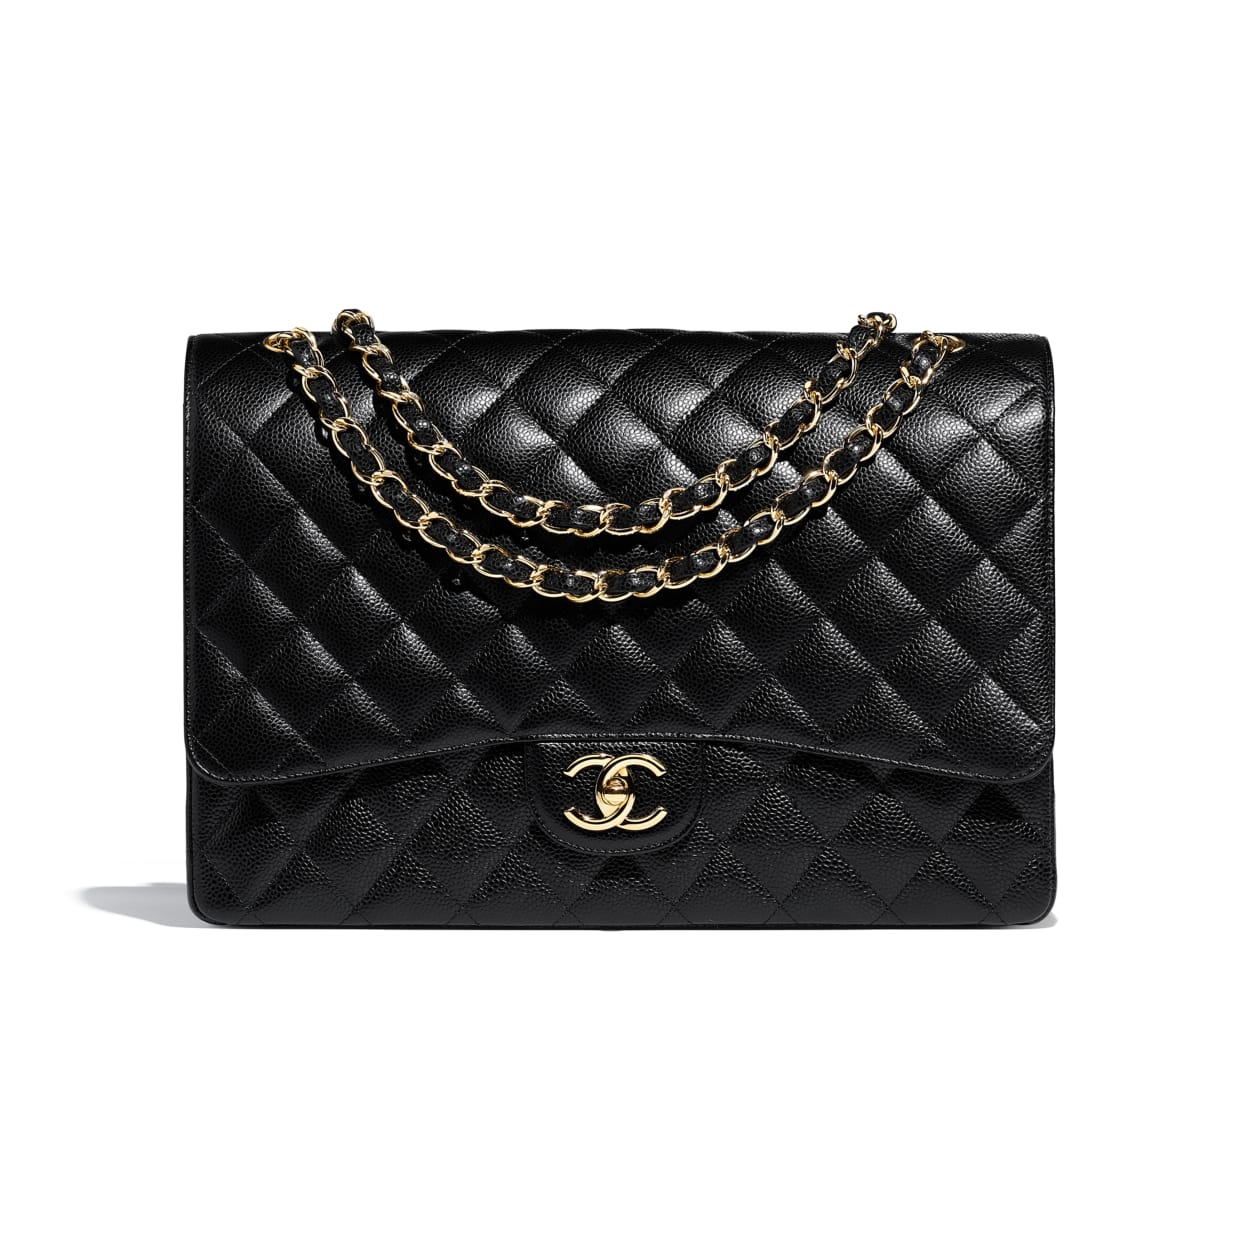 Chanel Bags  Chanel Handbags for Sale  Madison Avenue Couture